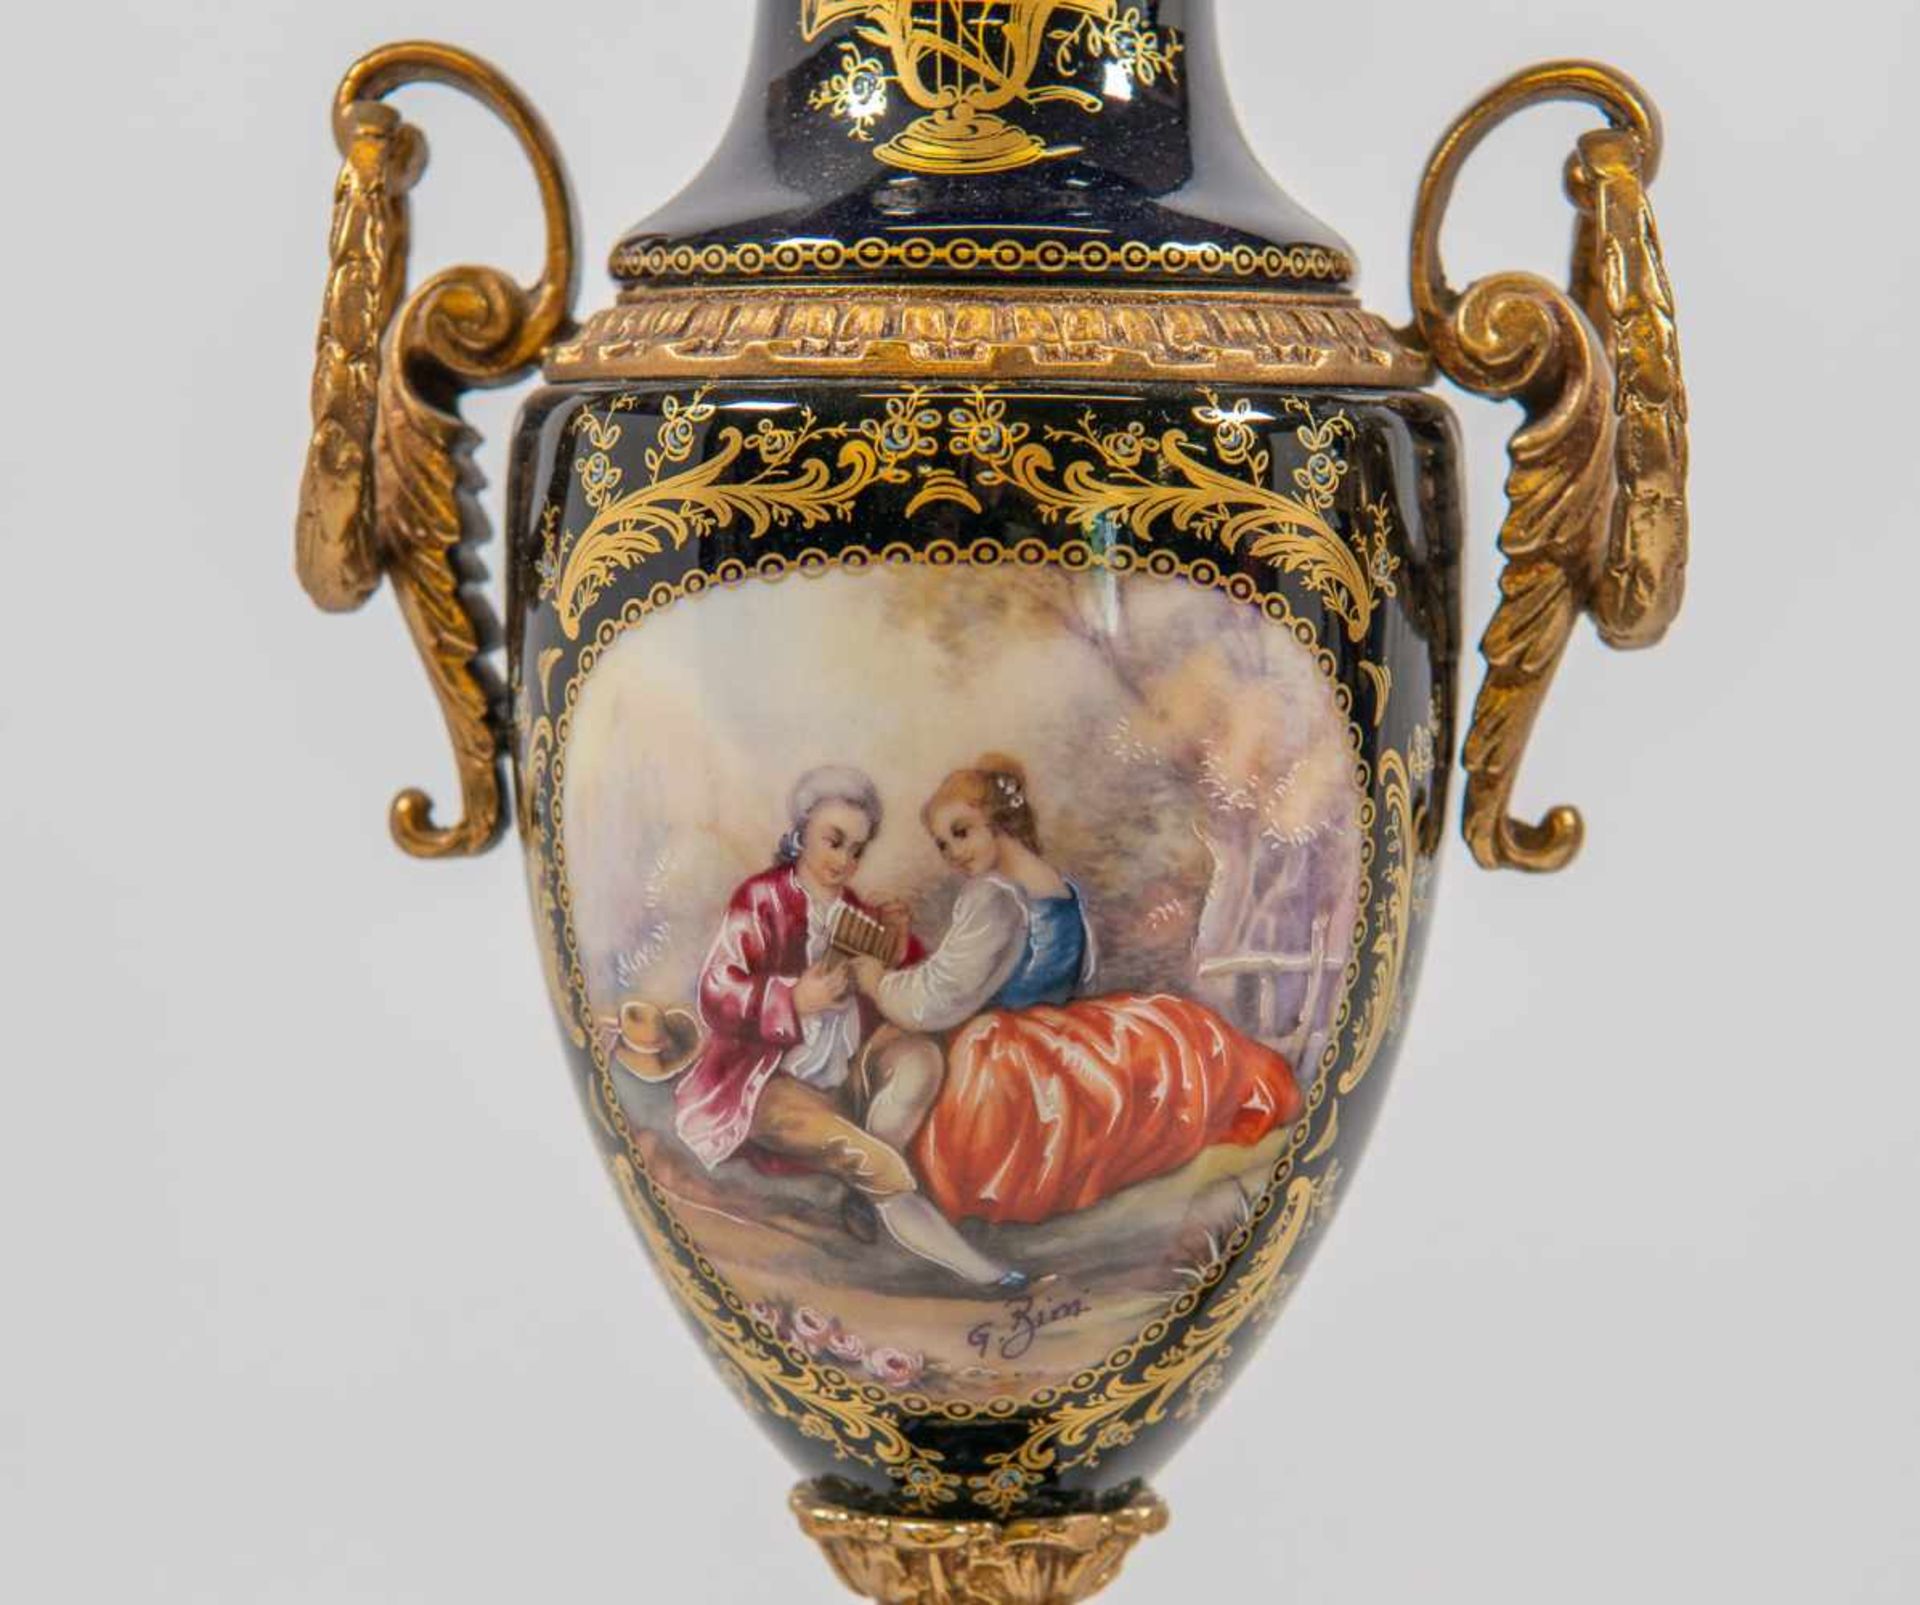 A.C.F. Decor de Sèvres, Pair of young vases, handpainted decor signed G. Rimi, bronze mounted. - Image 5 of 7